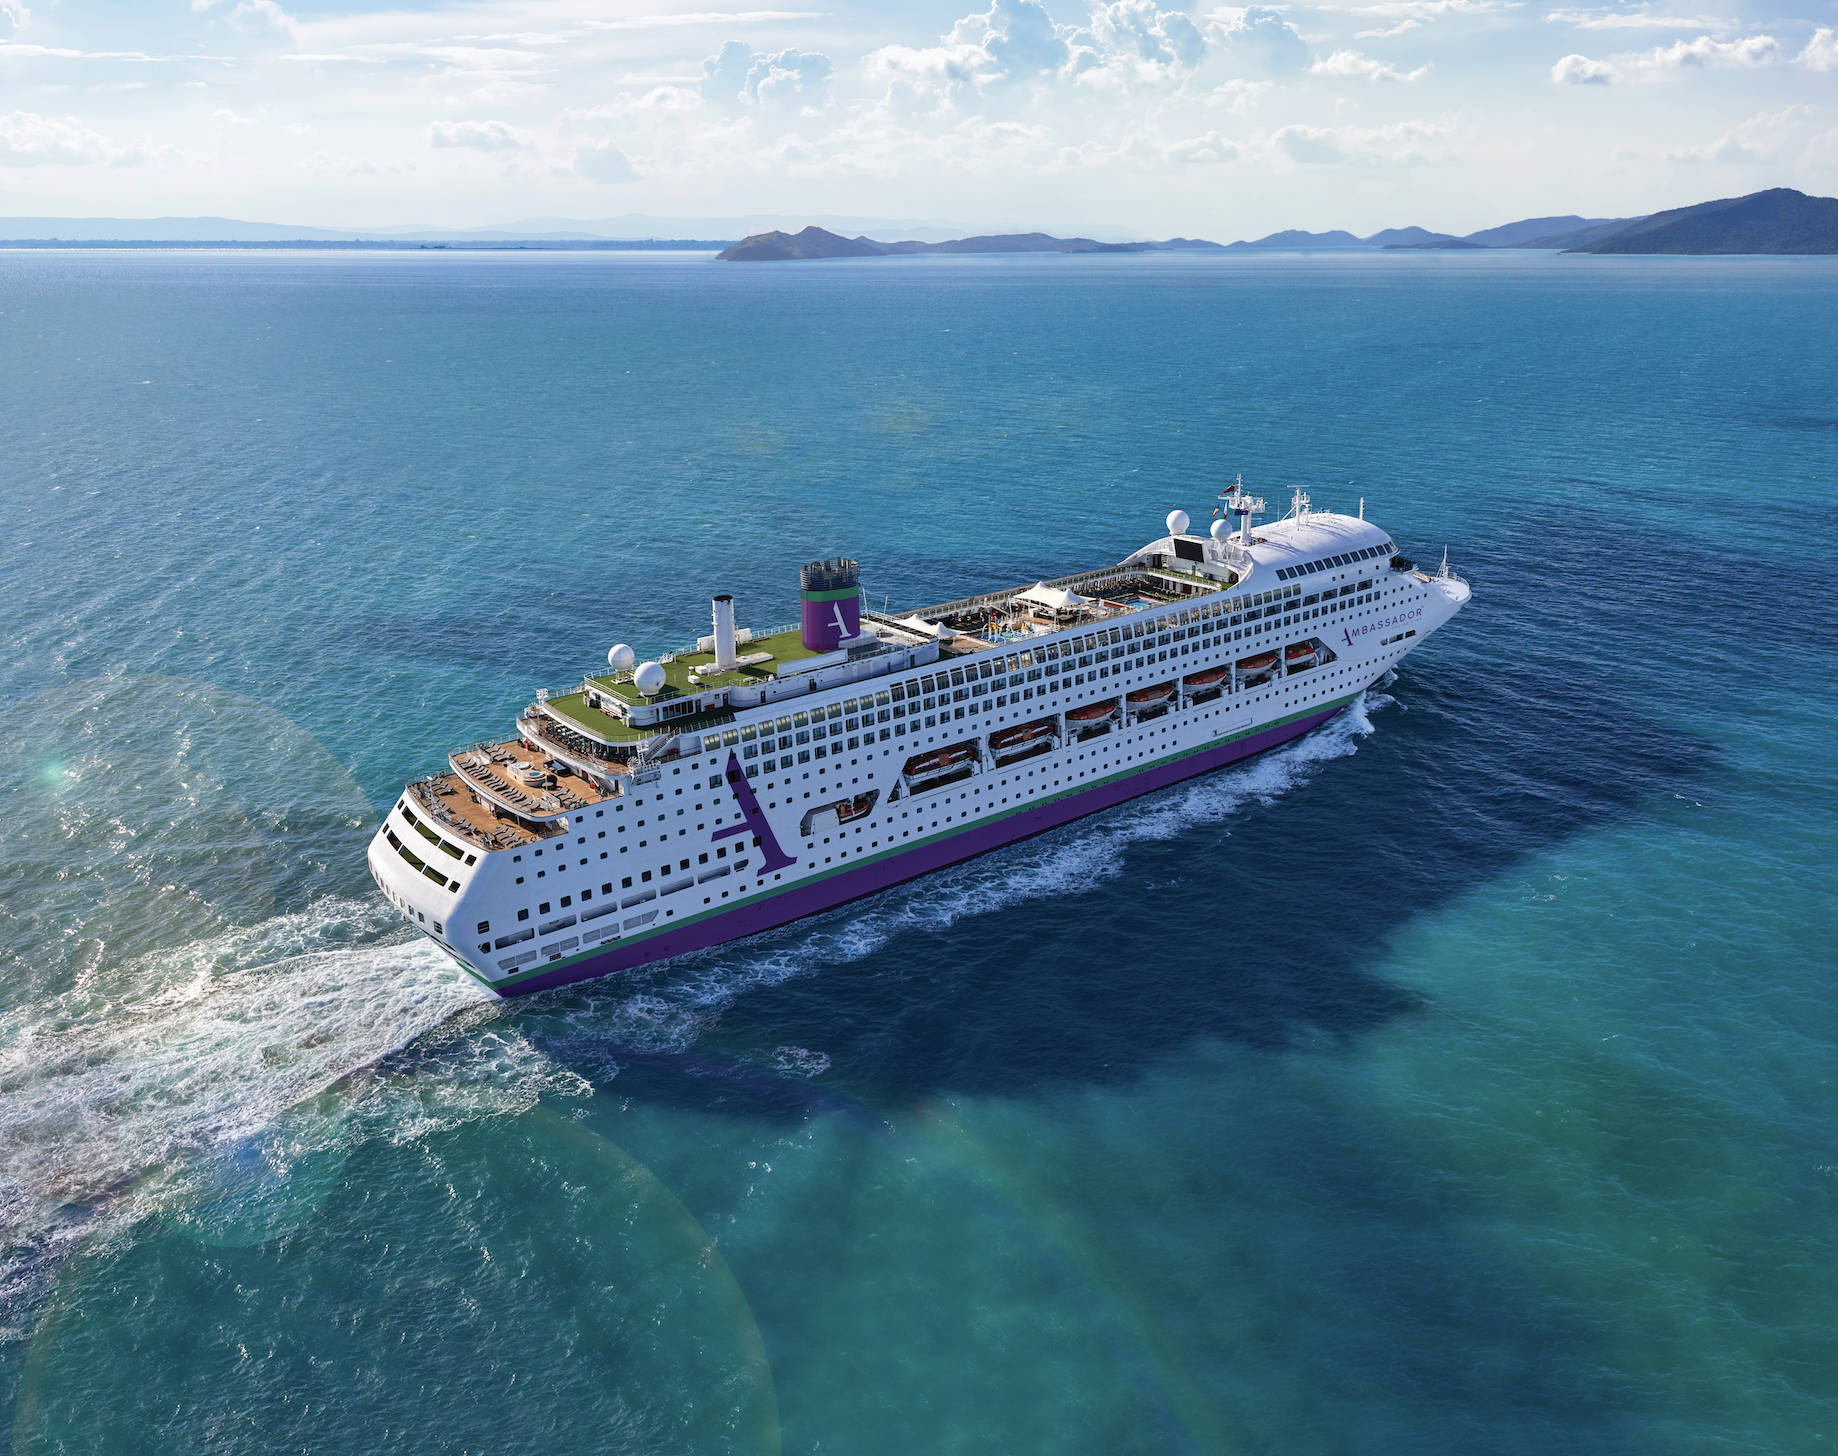 Ambassador Cruise Line releases new season, including first foray to Australia